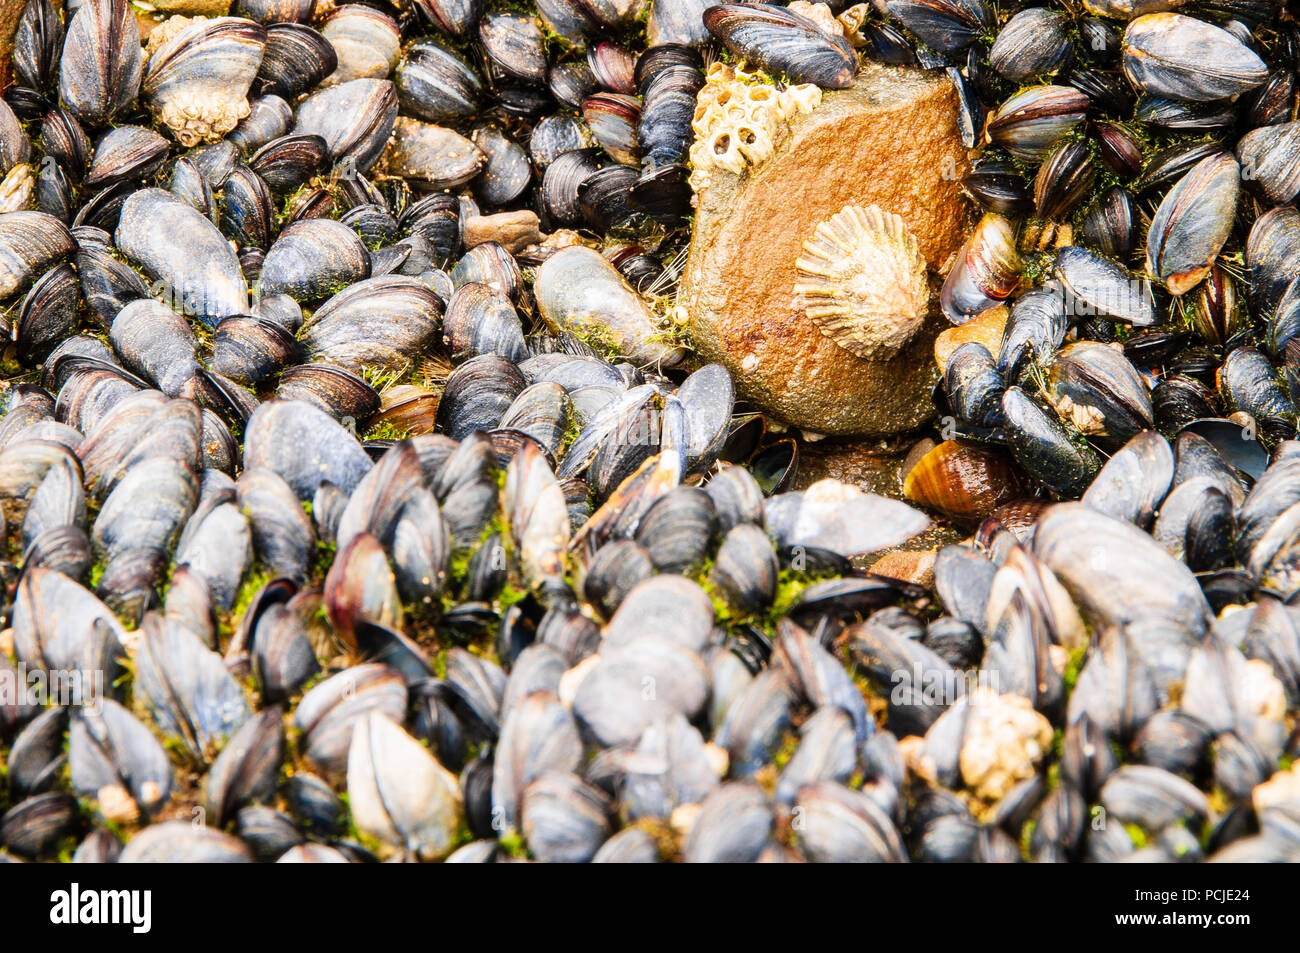 Close up of shells, including mussels, on a rock by the seaside in Bude, Cornwall Stock Photo